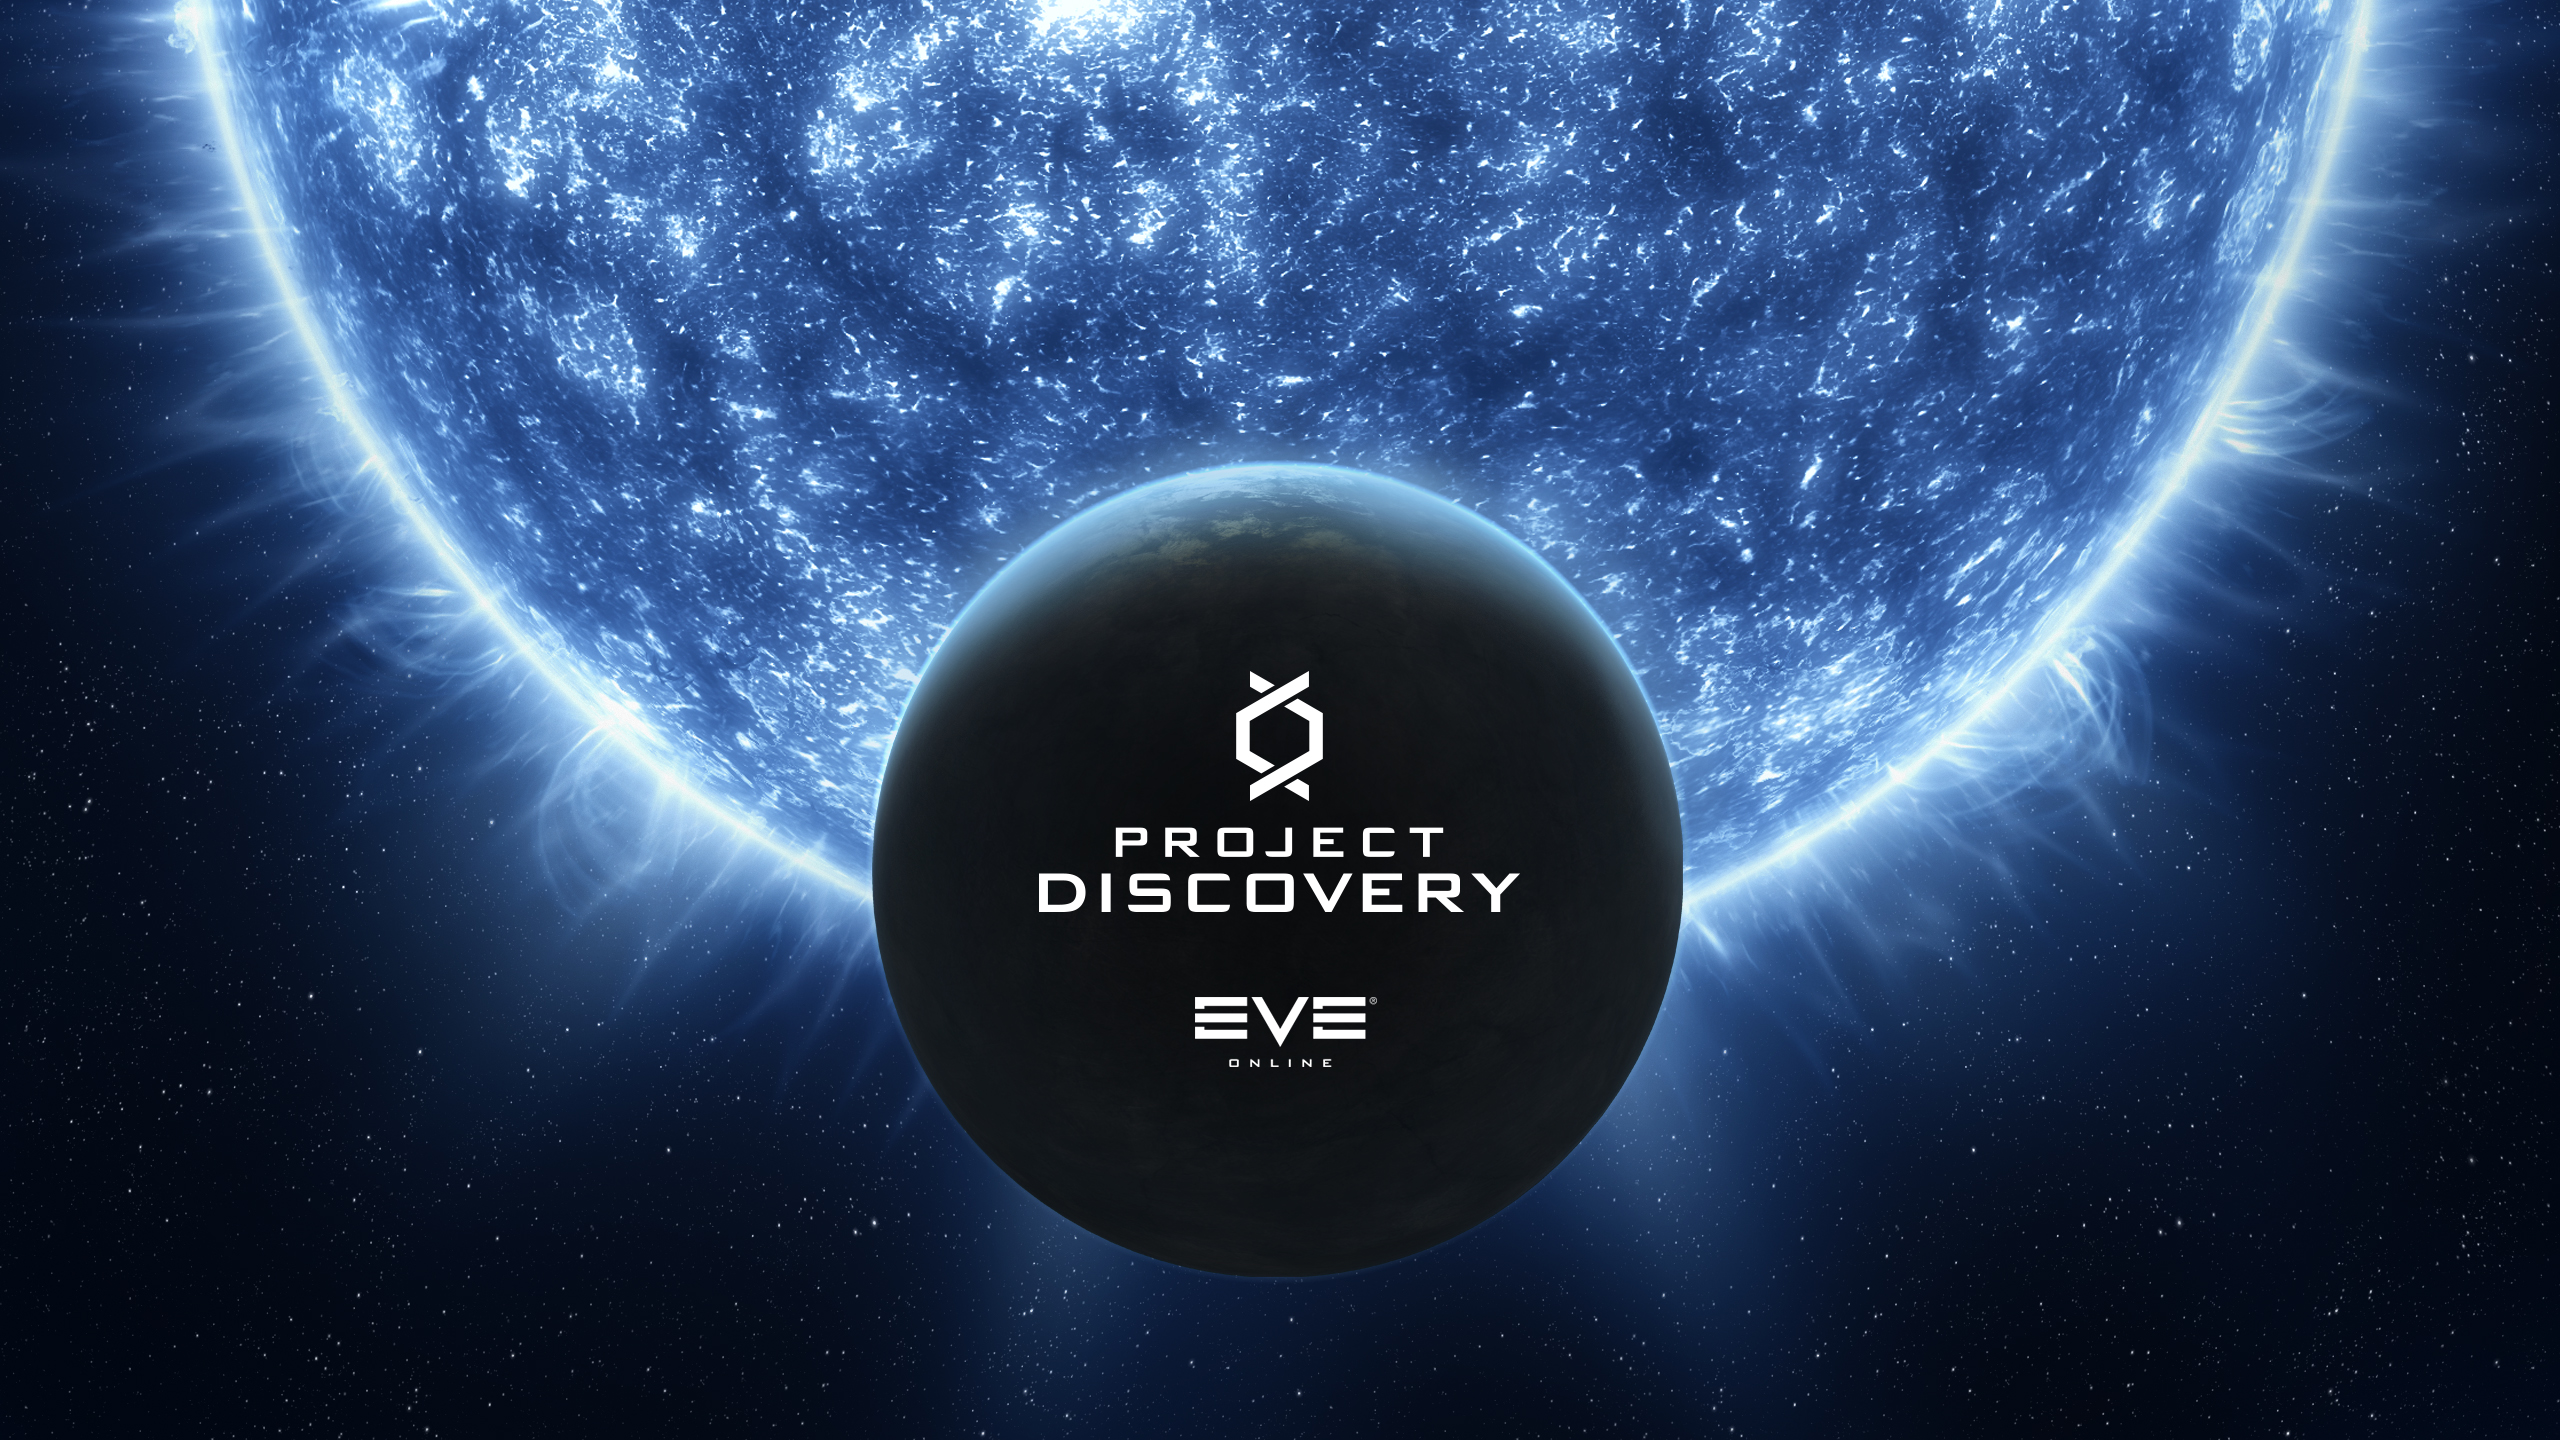 EVE Online's Project Discovery, 2023 recipient of a European Union Prize for Citizen Science Honorary Mention. Credits: © 2023 CCP ehf.